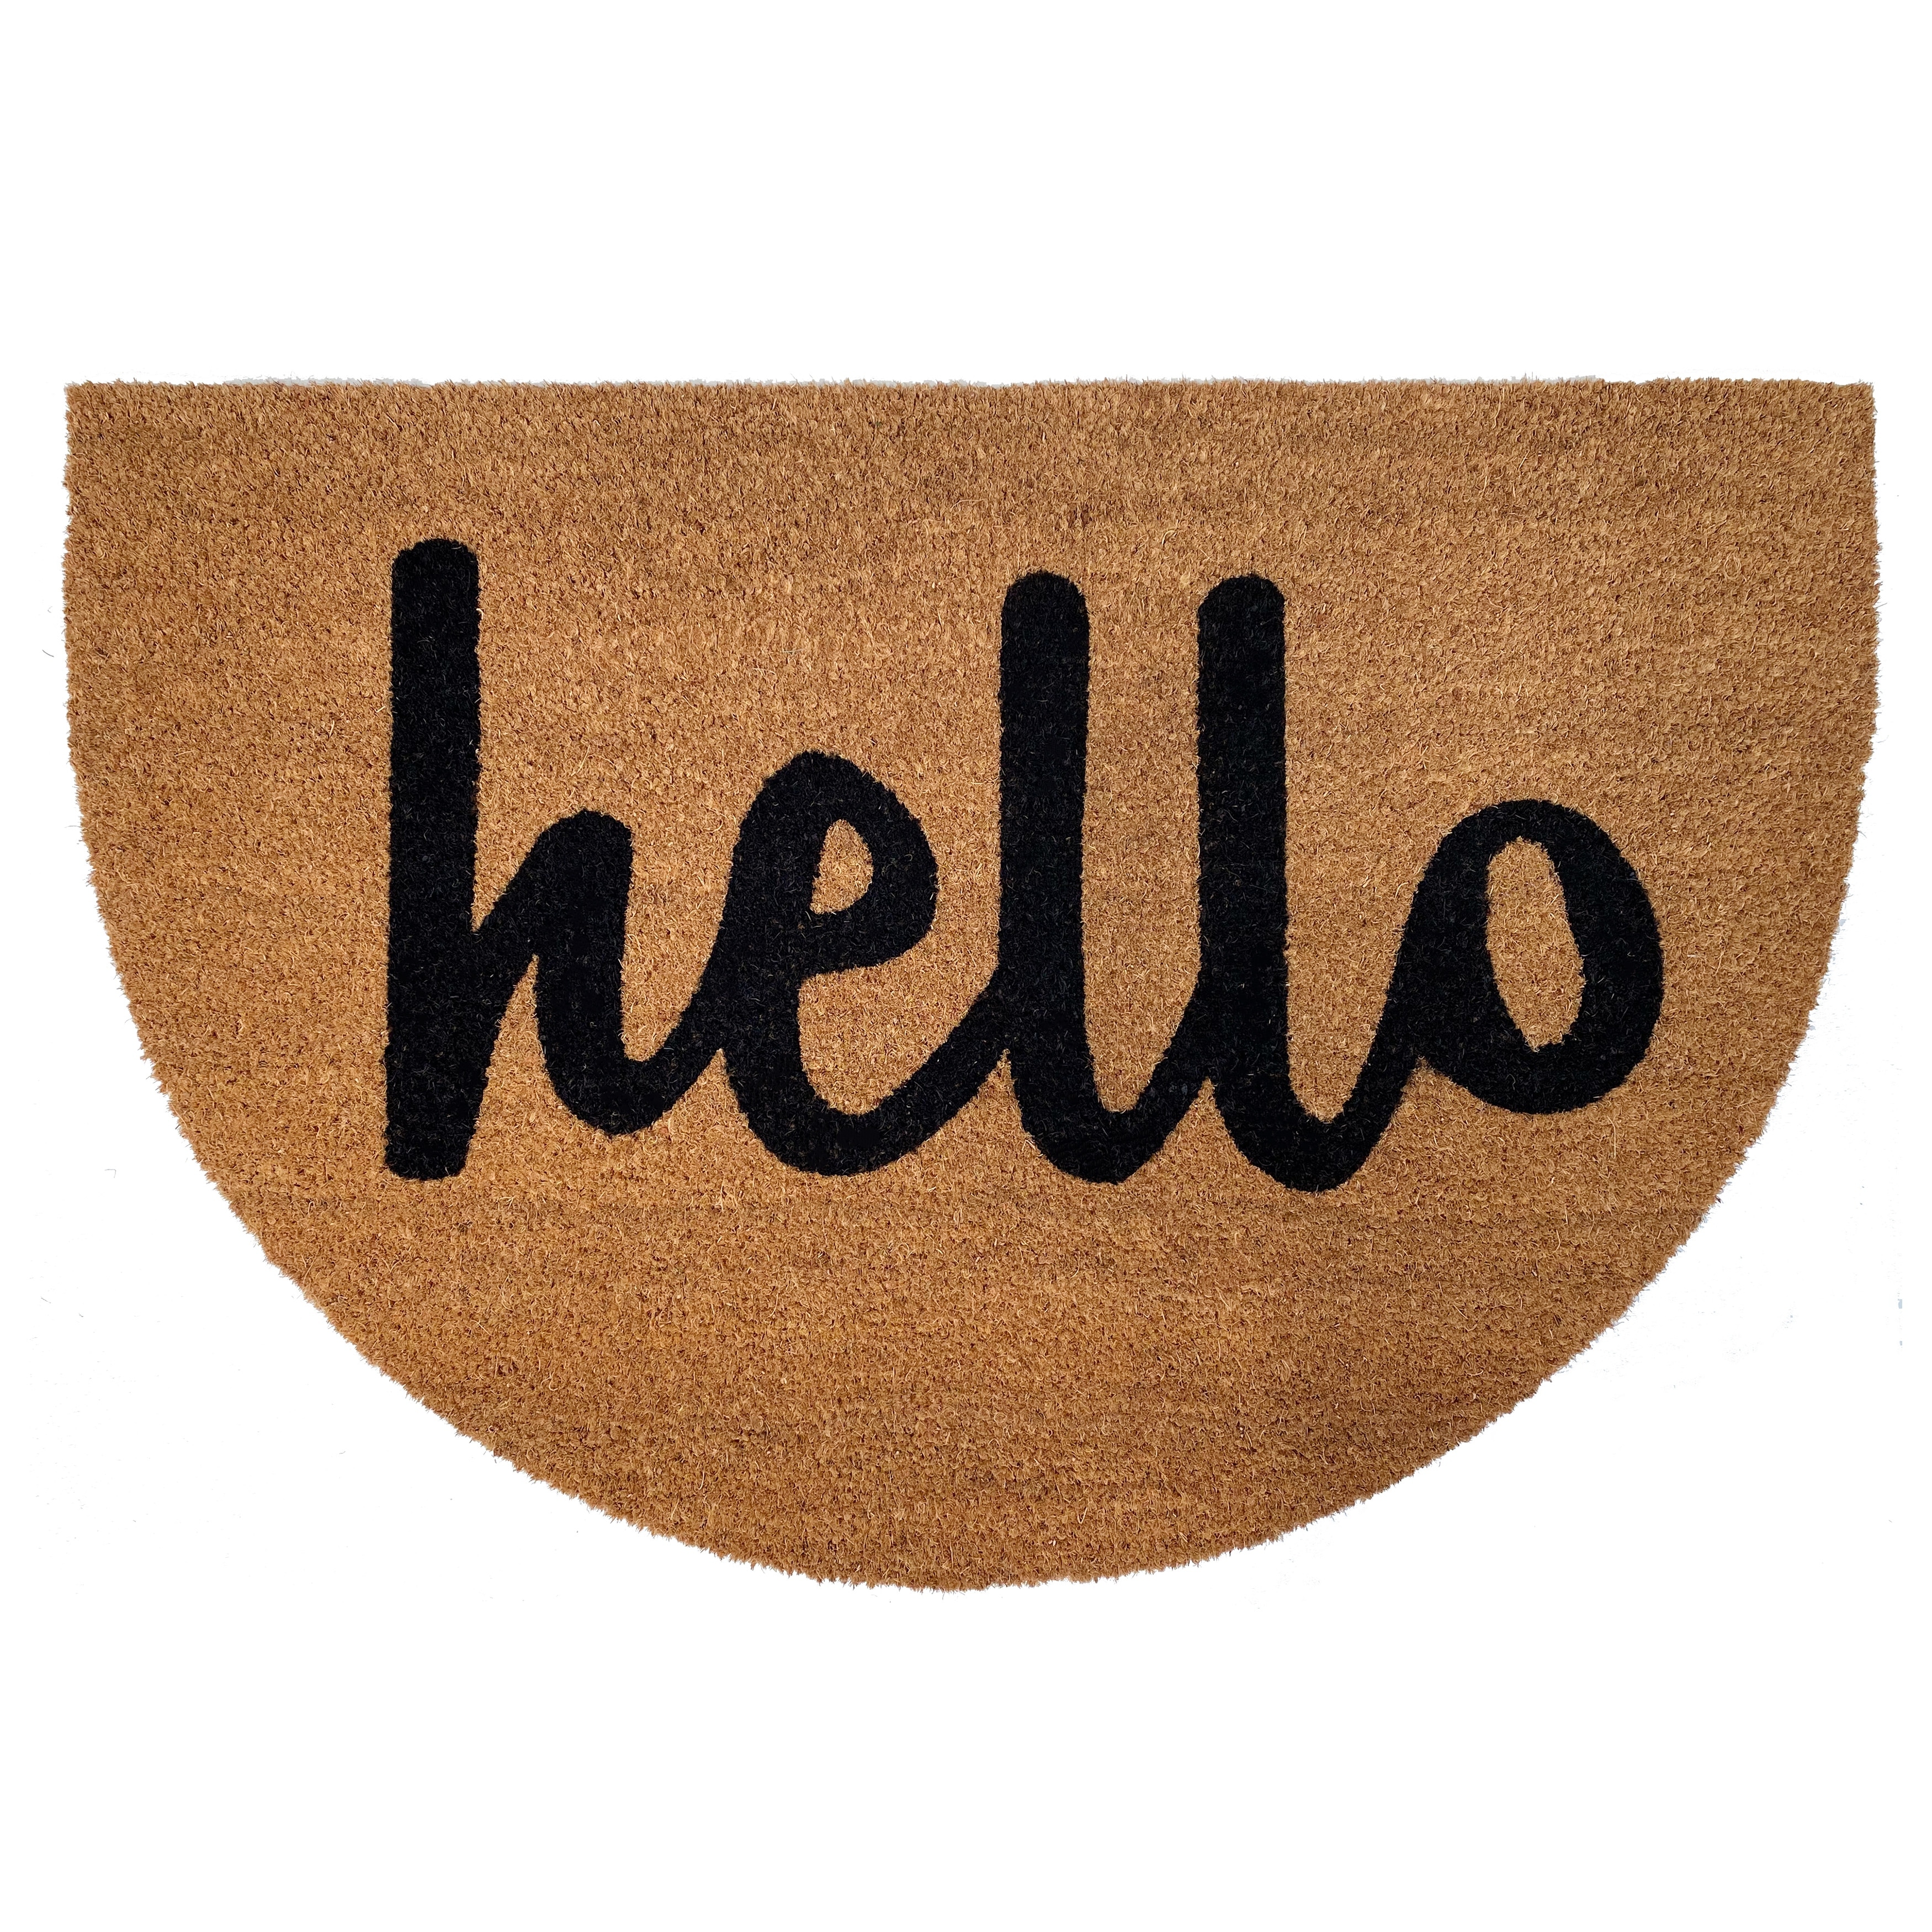 https://ak1.ostkcdn.com/images/products/is/images/direct/6110897705b1cecdeba41d28463c24a465f00150/Arch-Hello-Doormat%2C-24%22-x-36%22.jpg